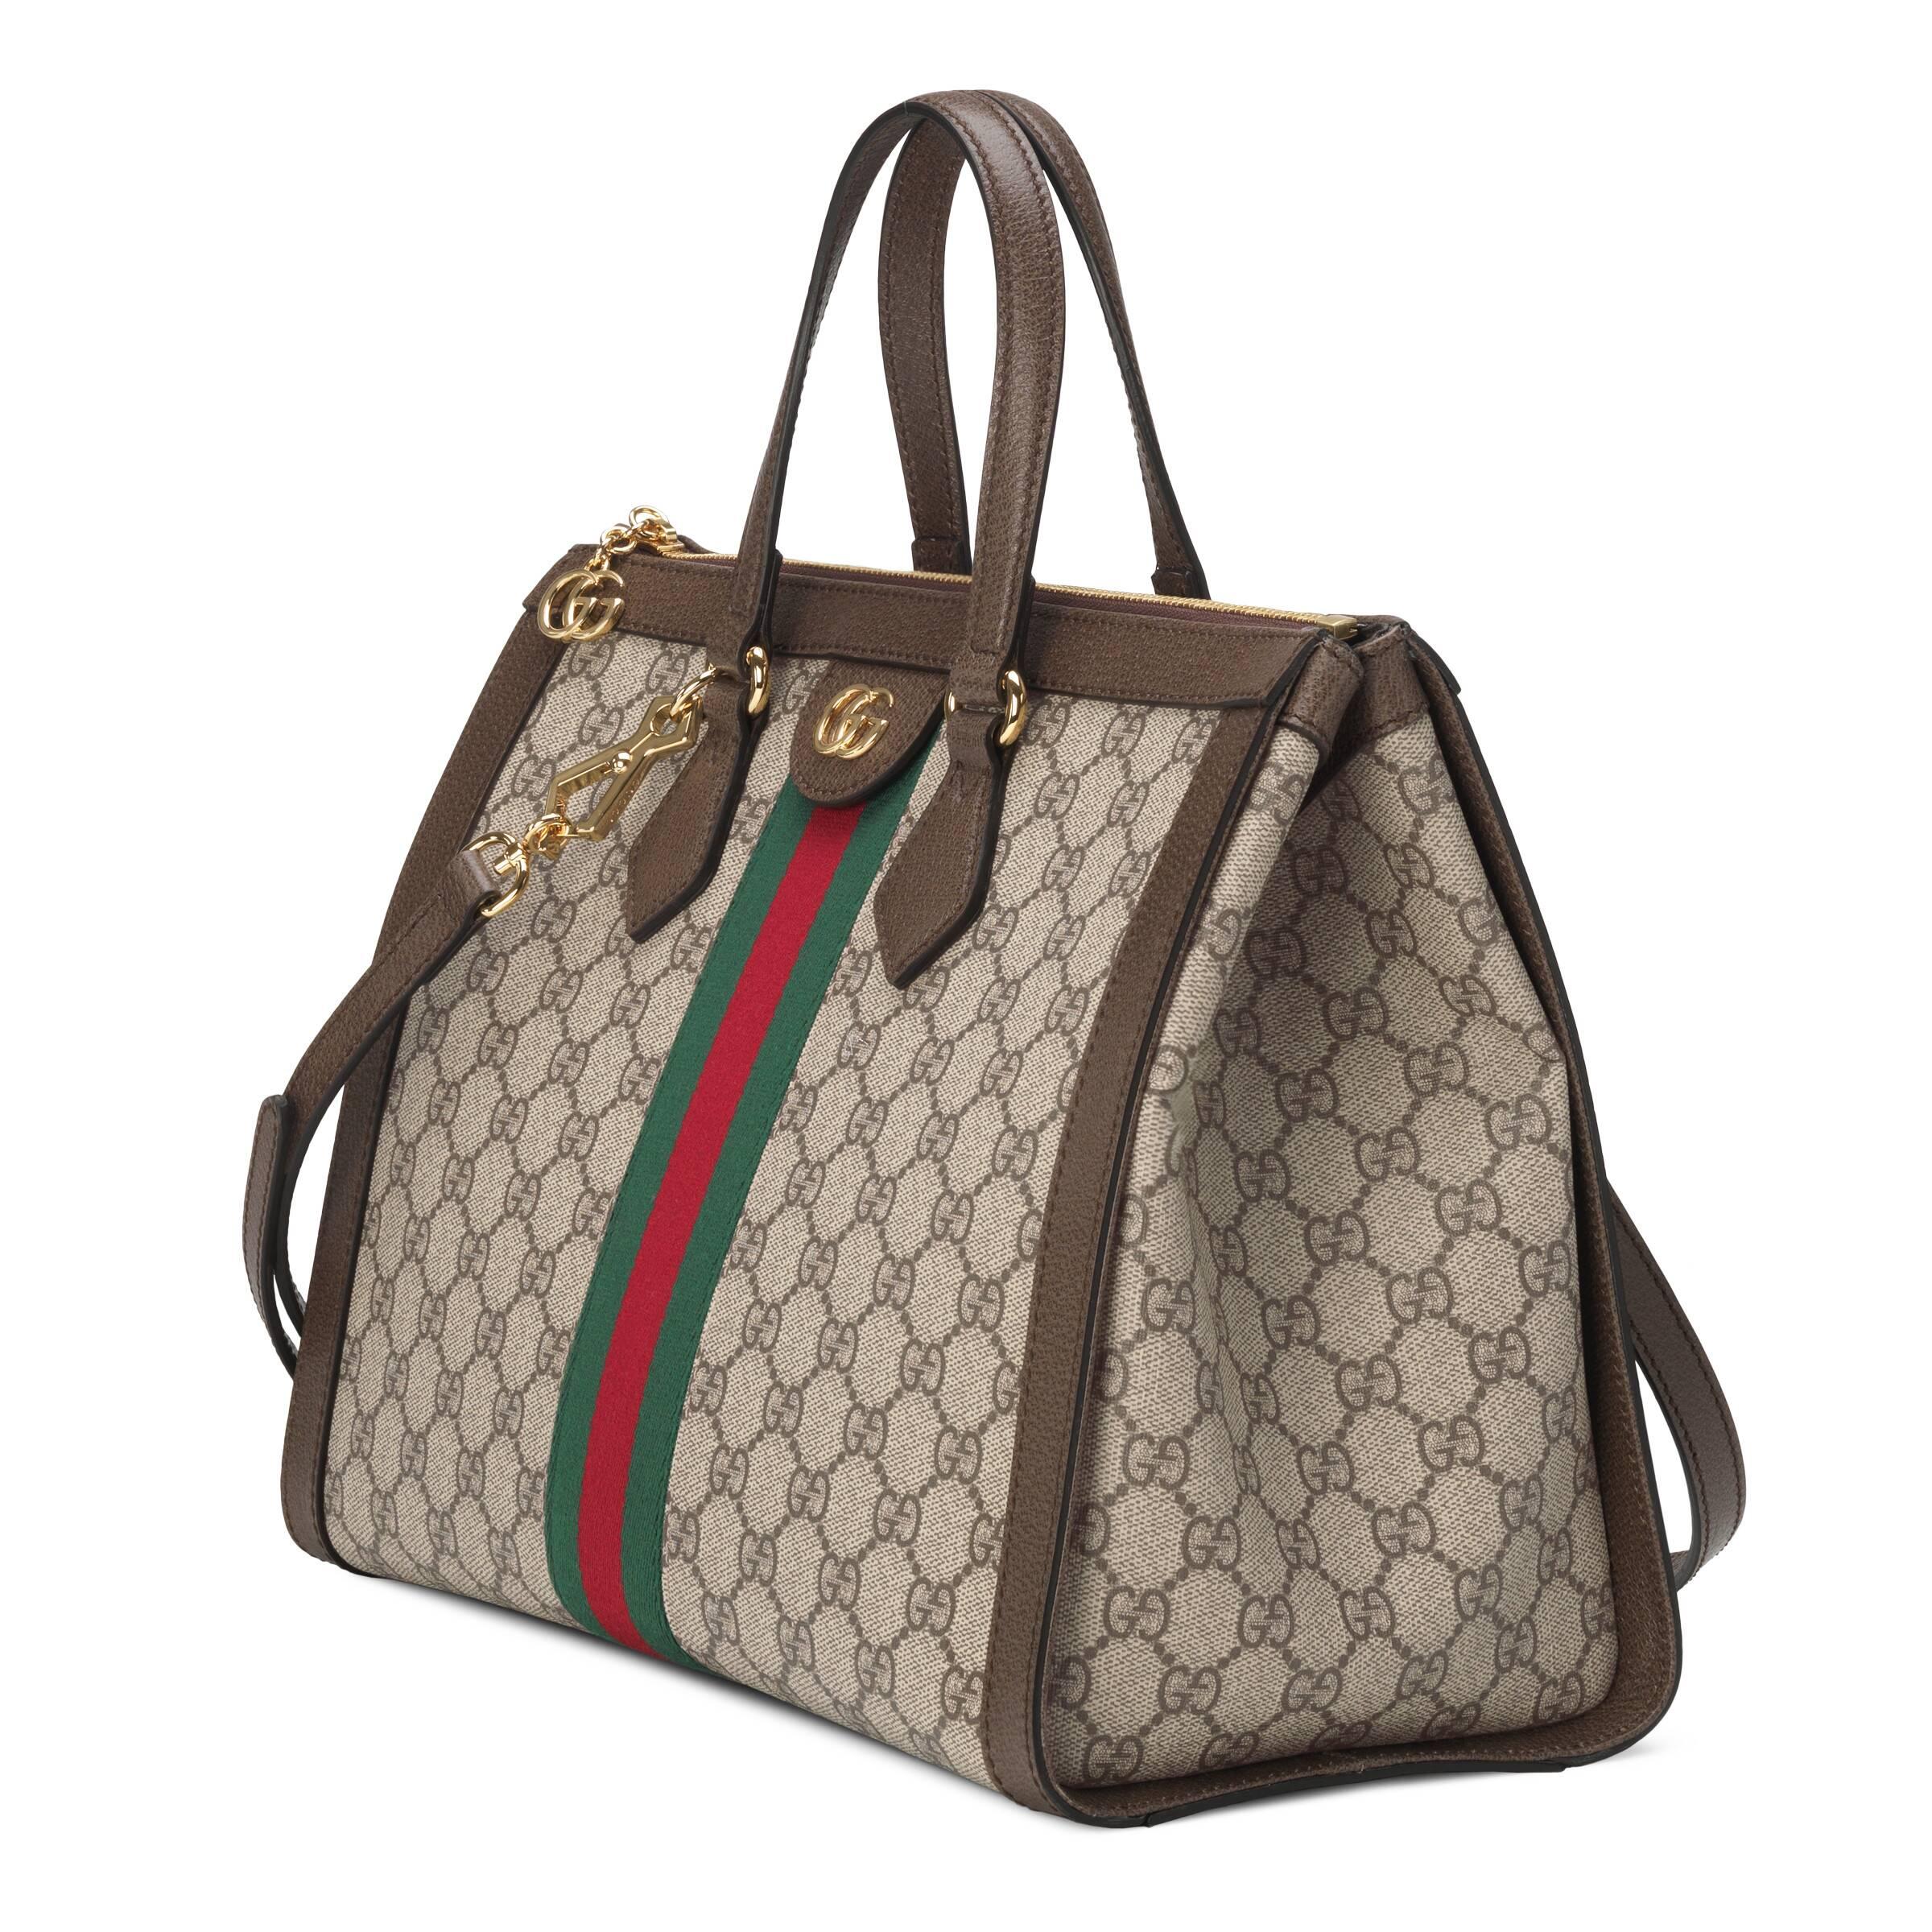 Gucci Synthetic Ophidia GG Medium Tote Bag in Beige (Natural) - Lyst